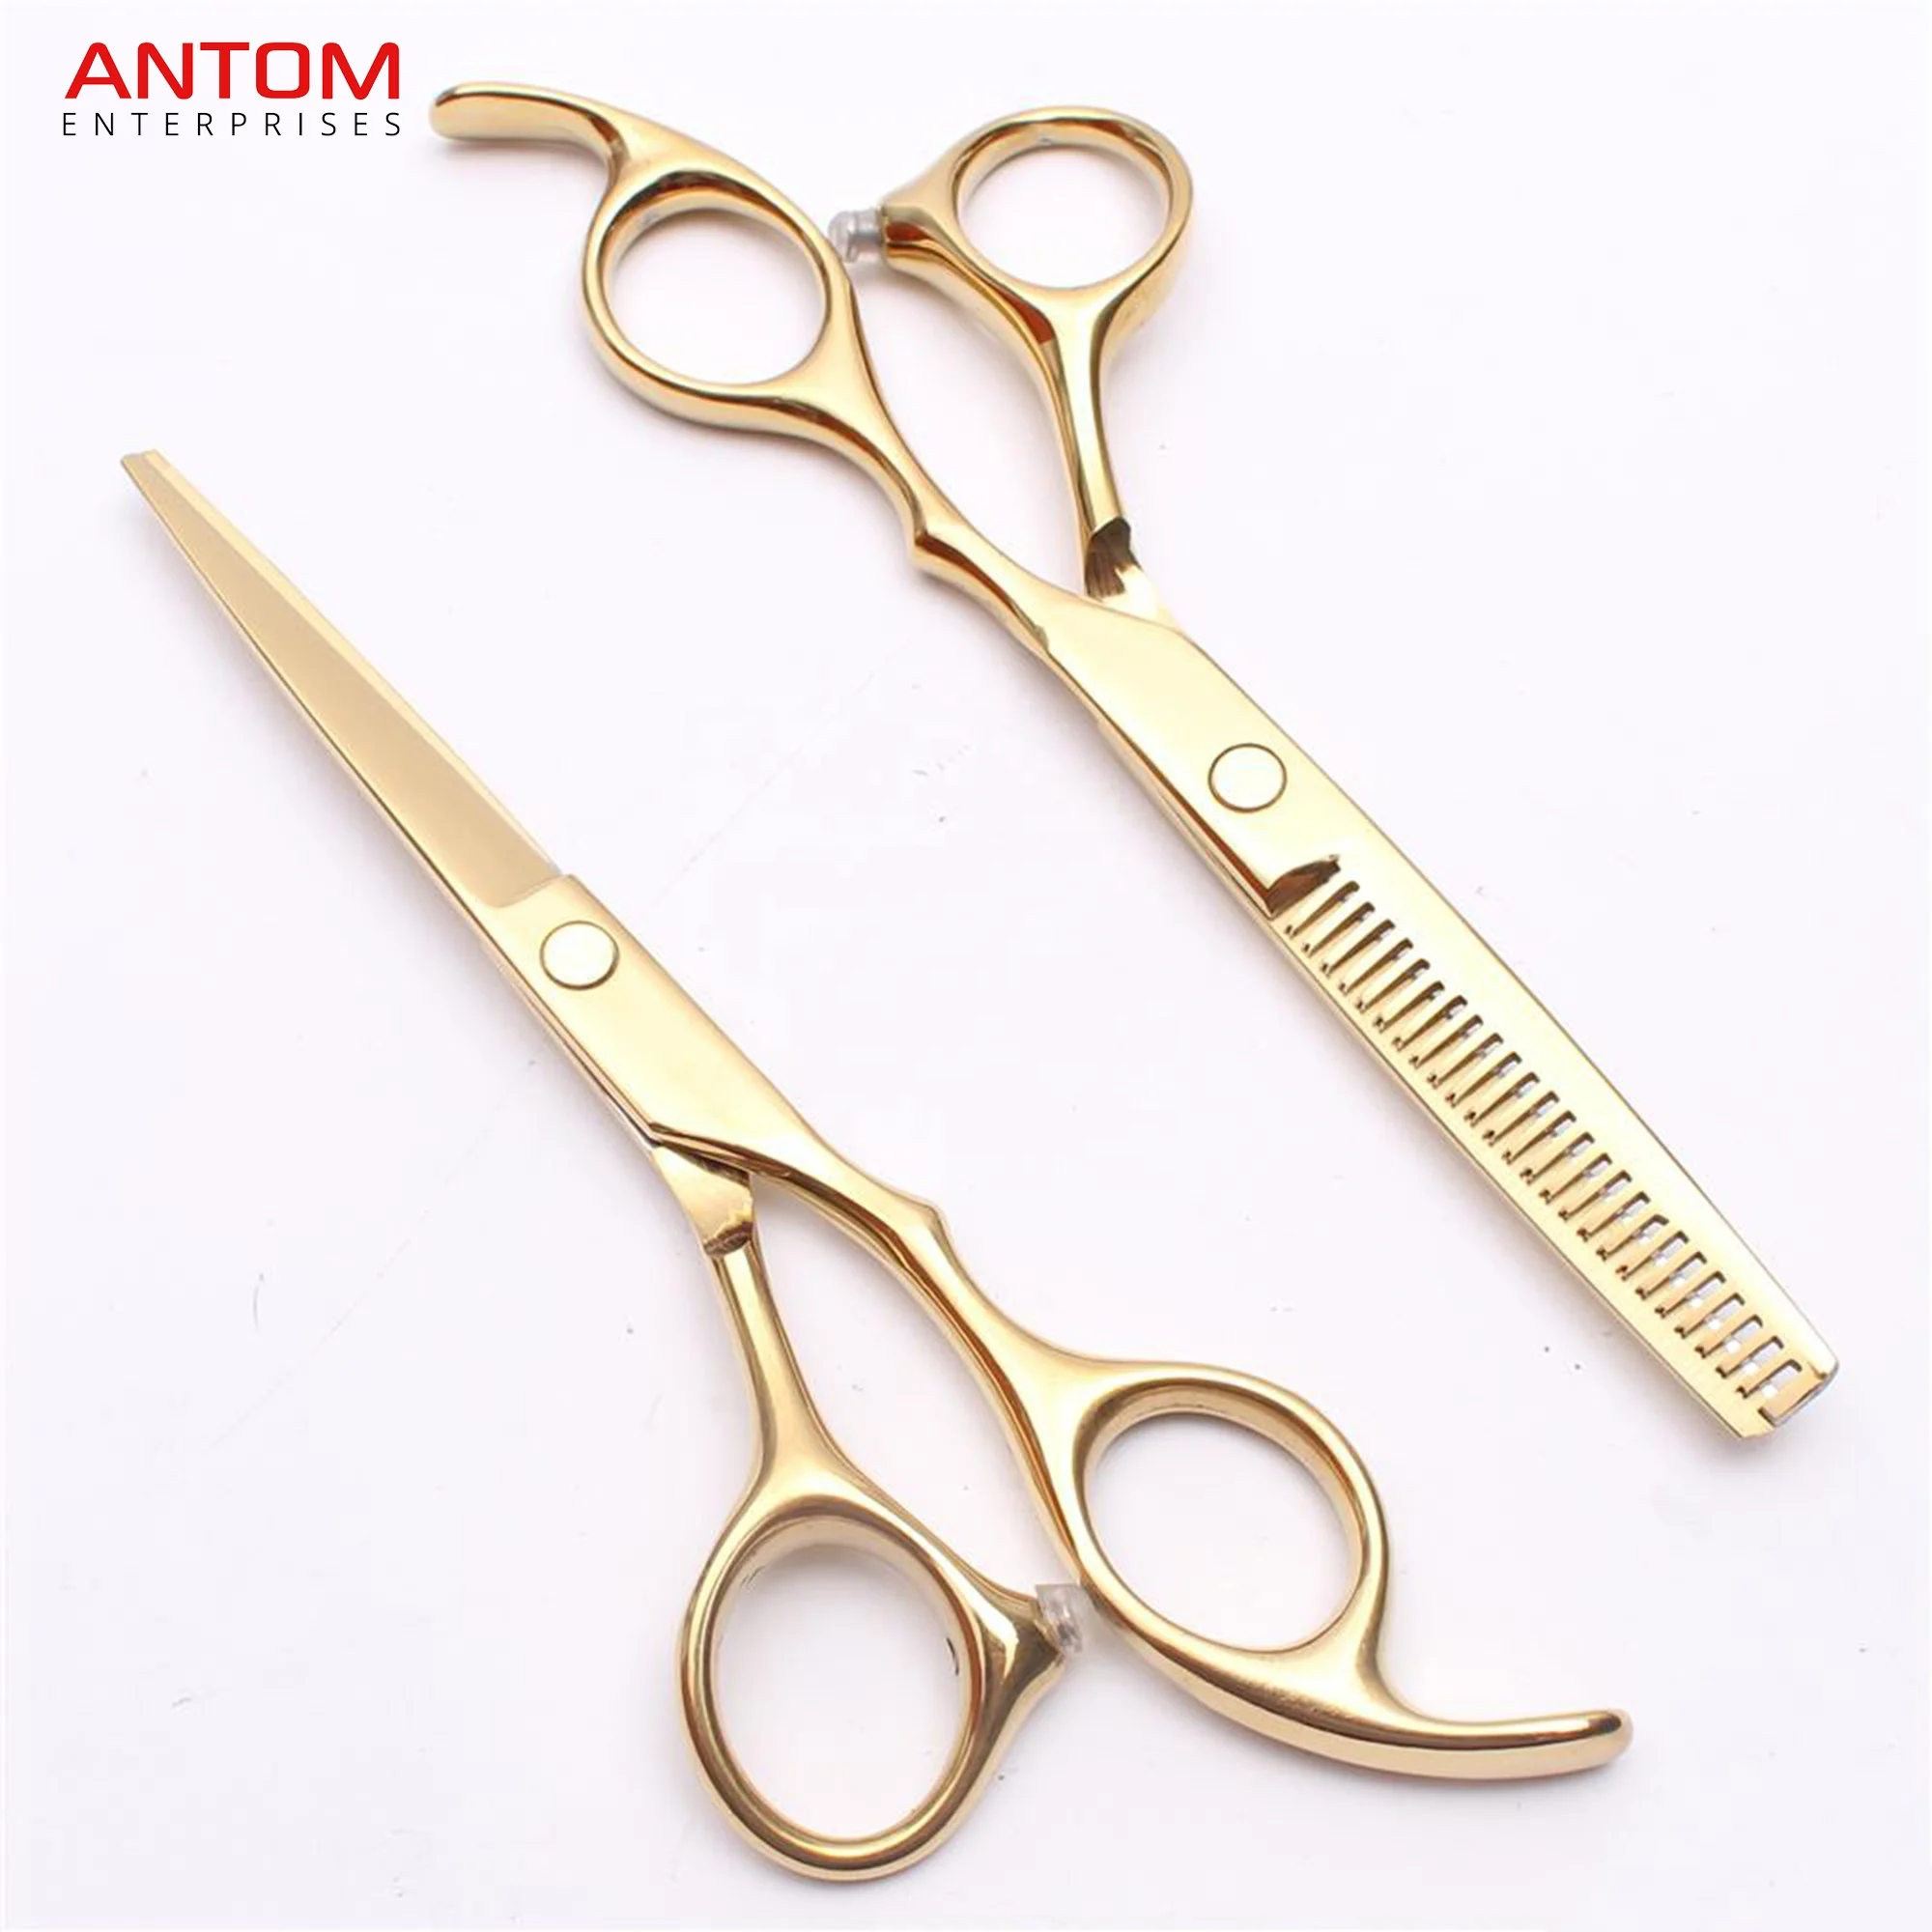 2019 Professional Barber Salon Thinning Hair Scissors Professional Hair Cut Scissors Made By Antom Enterprises Buy Hair Cutting Shears Barber Scissors J2 Steel Hair Scissor For Cutting Professional Barber Styling Types Of [ 2000 x 2000 Pixel ]